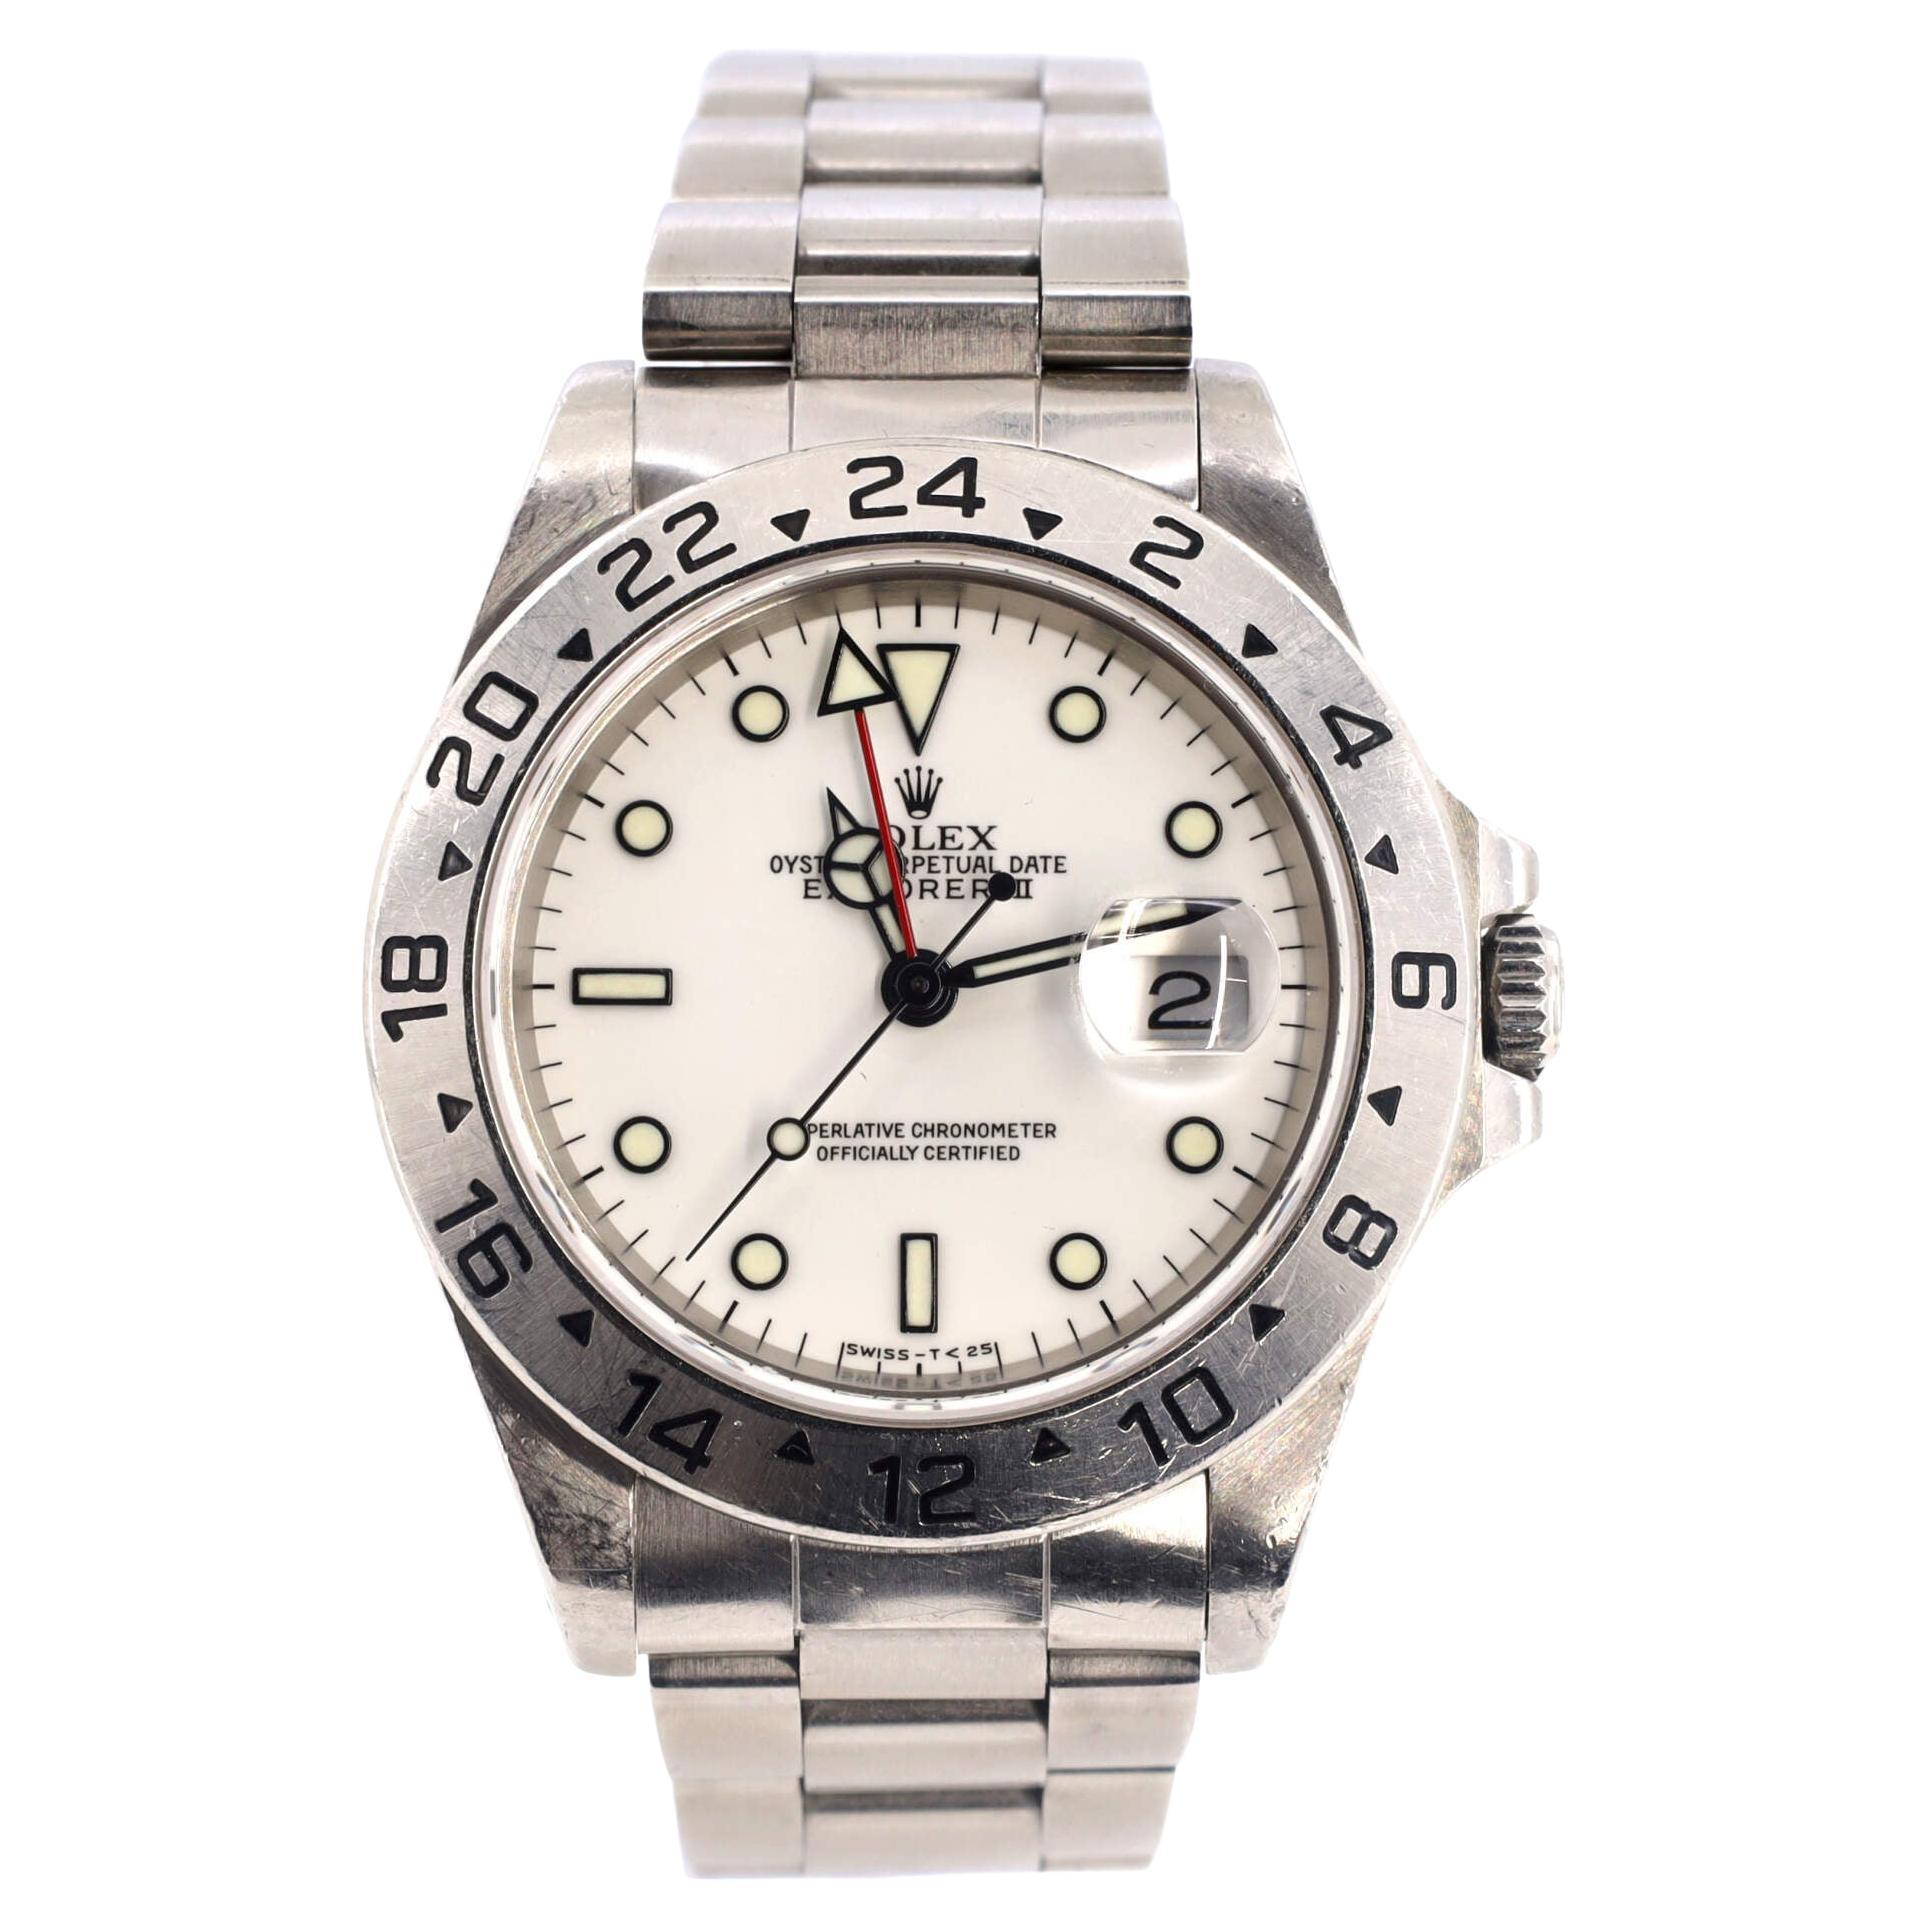 Rolex Oyster Perpetual Explorer II Automatic Watch Stainless Steel 40